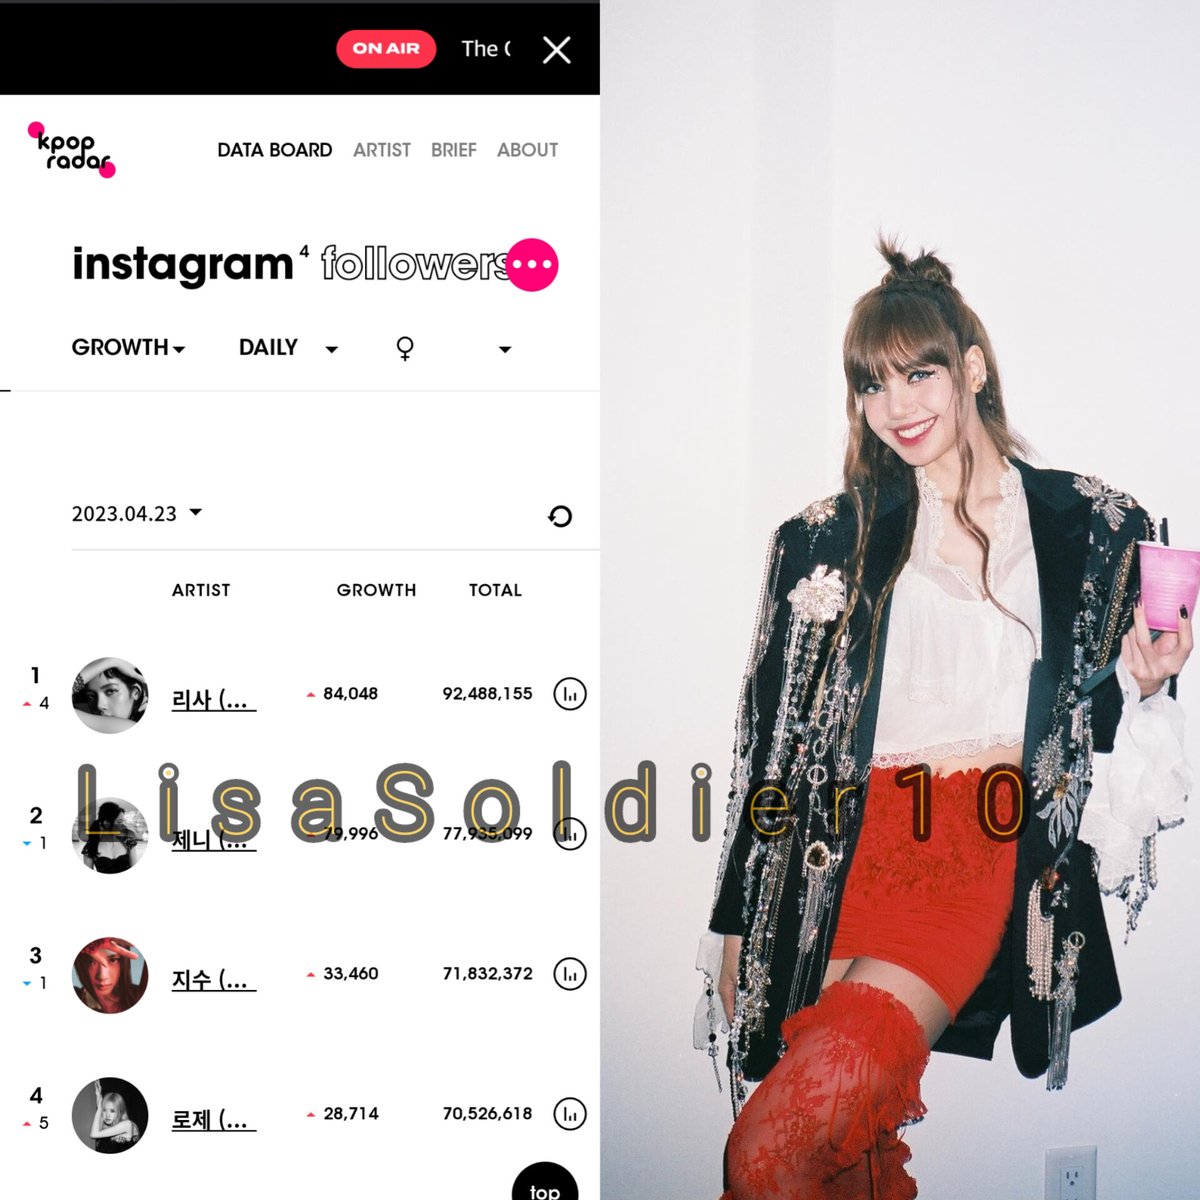 ✨📝 (INFO) #LISA (lalalalisa_m) was the most followed BLACKPINK member and K-Pop female act in the last 24 hours on Instagram with 84,048 new followers following headlining Coachella Weekend 2. 🔥

BOSSPINK LISA COACHELLA
#LisachellaReturns 

KEEP ON ENGINE HER IG 😍🤩